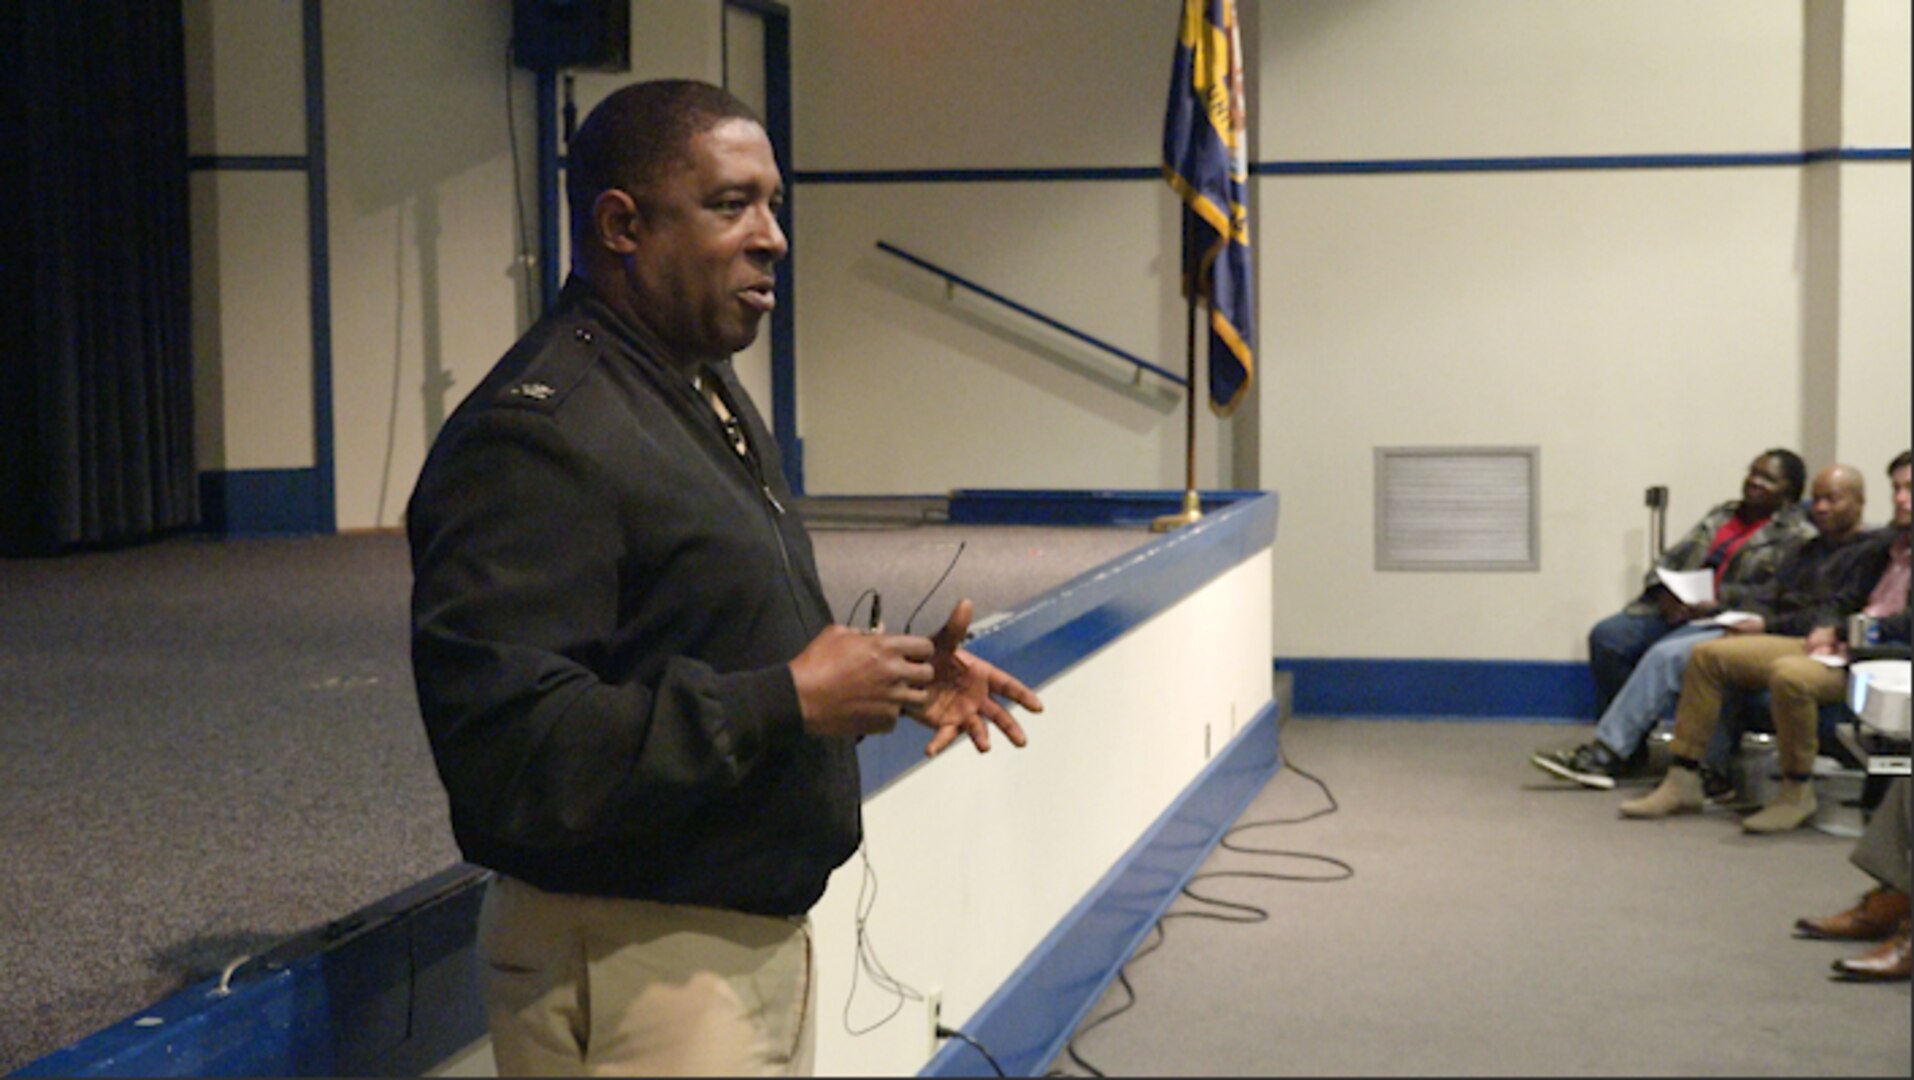 IMAGE: DAHLGREN, Va. – Capt. Godfrey “Gus” Weekes, NSWCDD Commanding Officer, delivered the keynote talk during the annual Black History Observance on Feb. 21. Weekes spoke to a standing-room only crowd in the Base Theater.